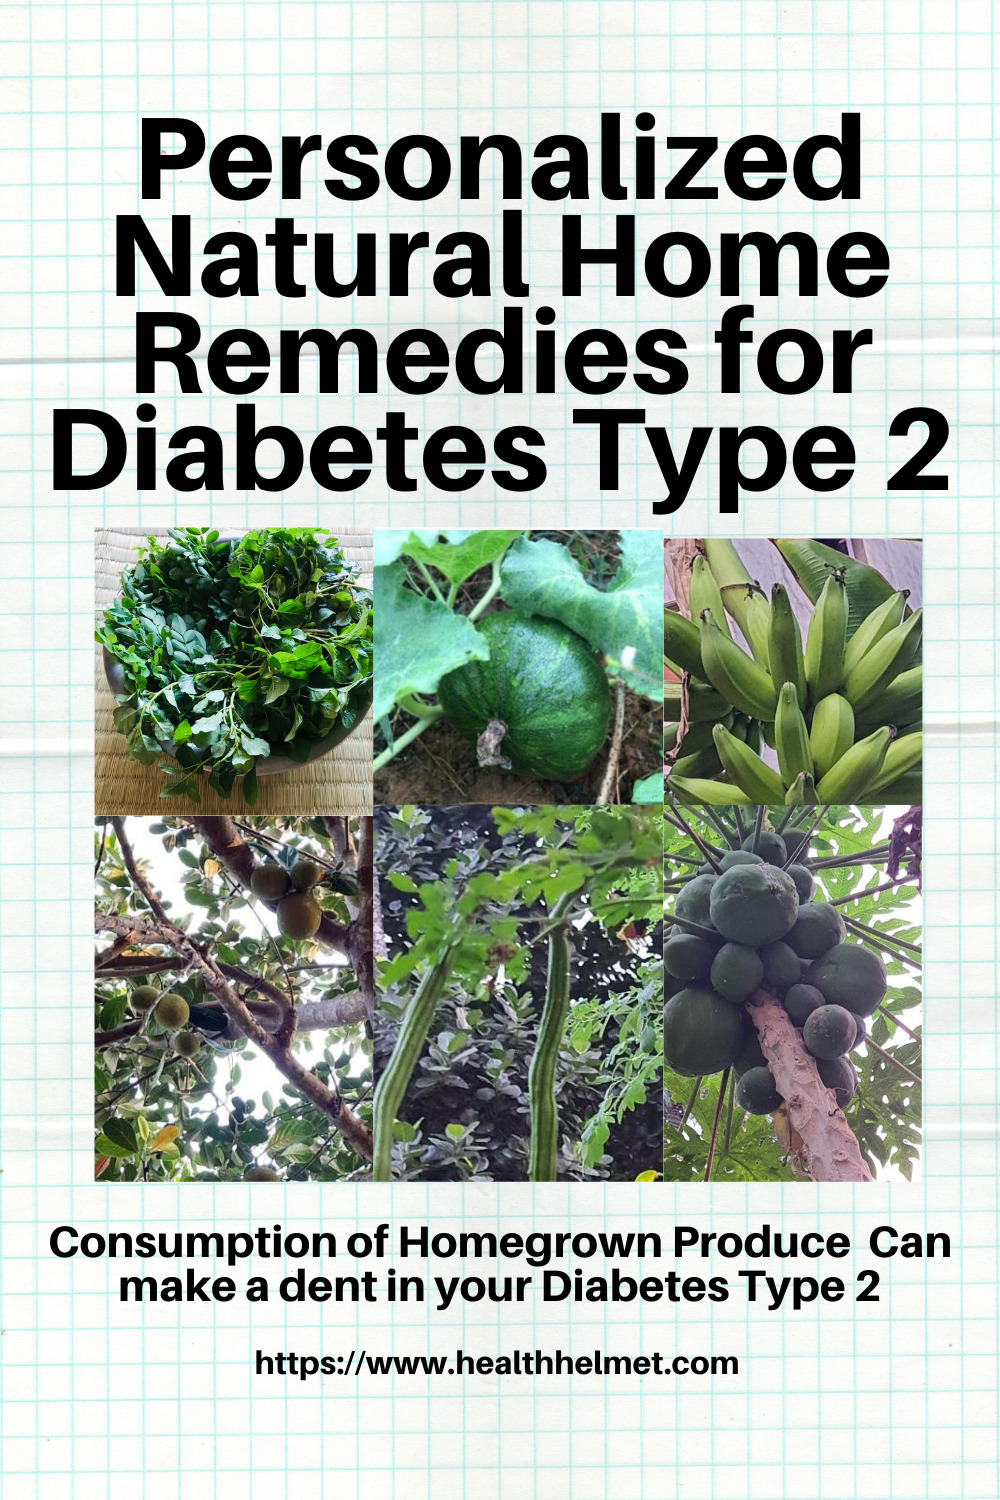 Personalized Natural Home Remedies for Diabetes Type 2 (1)